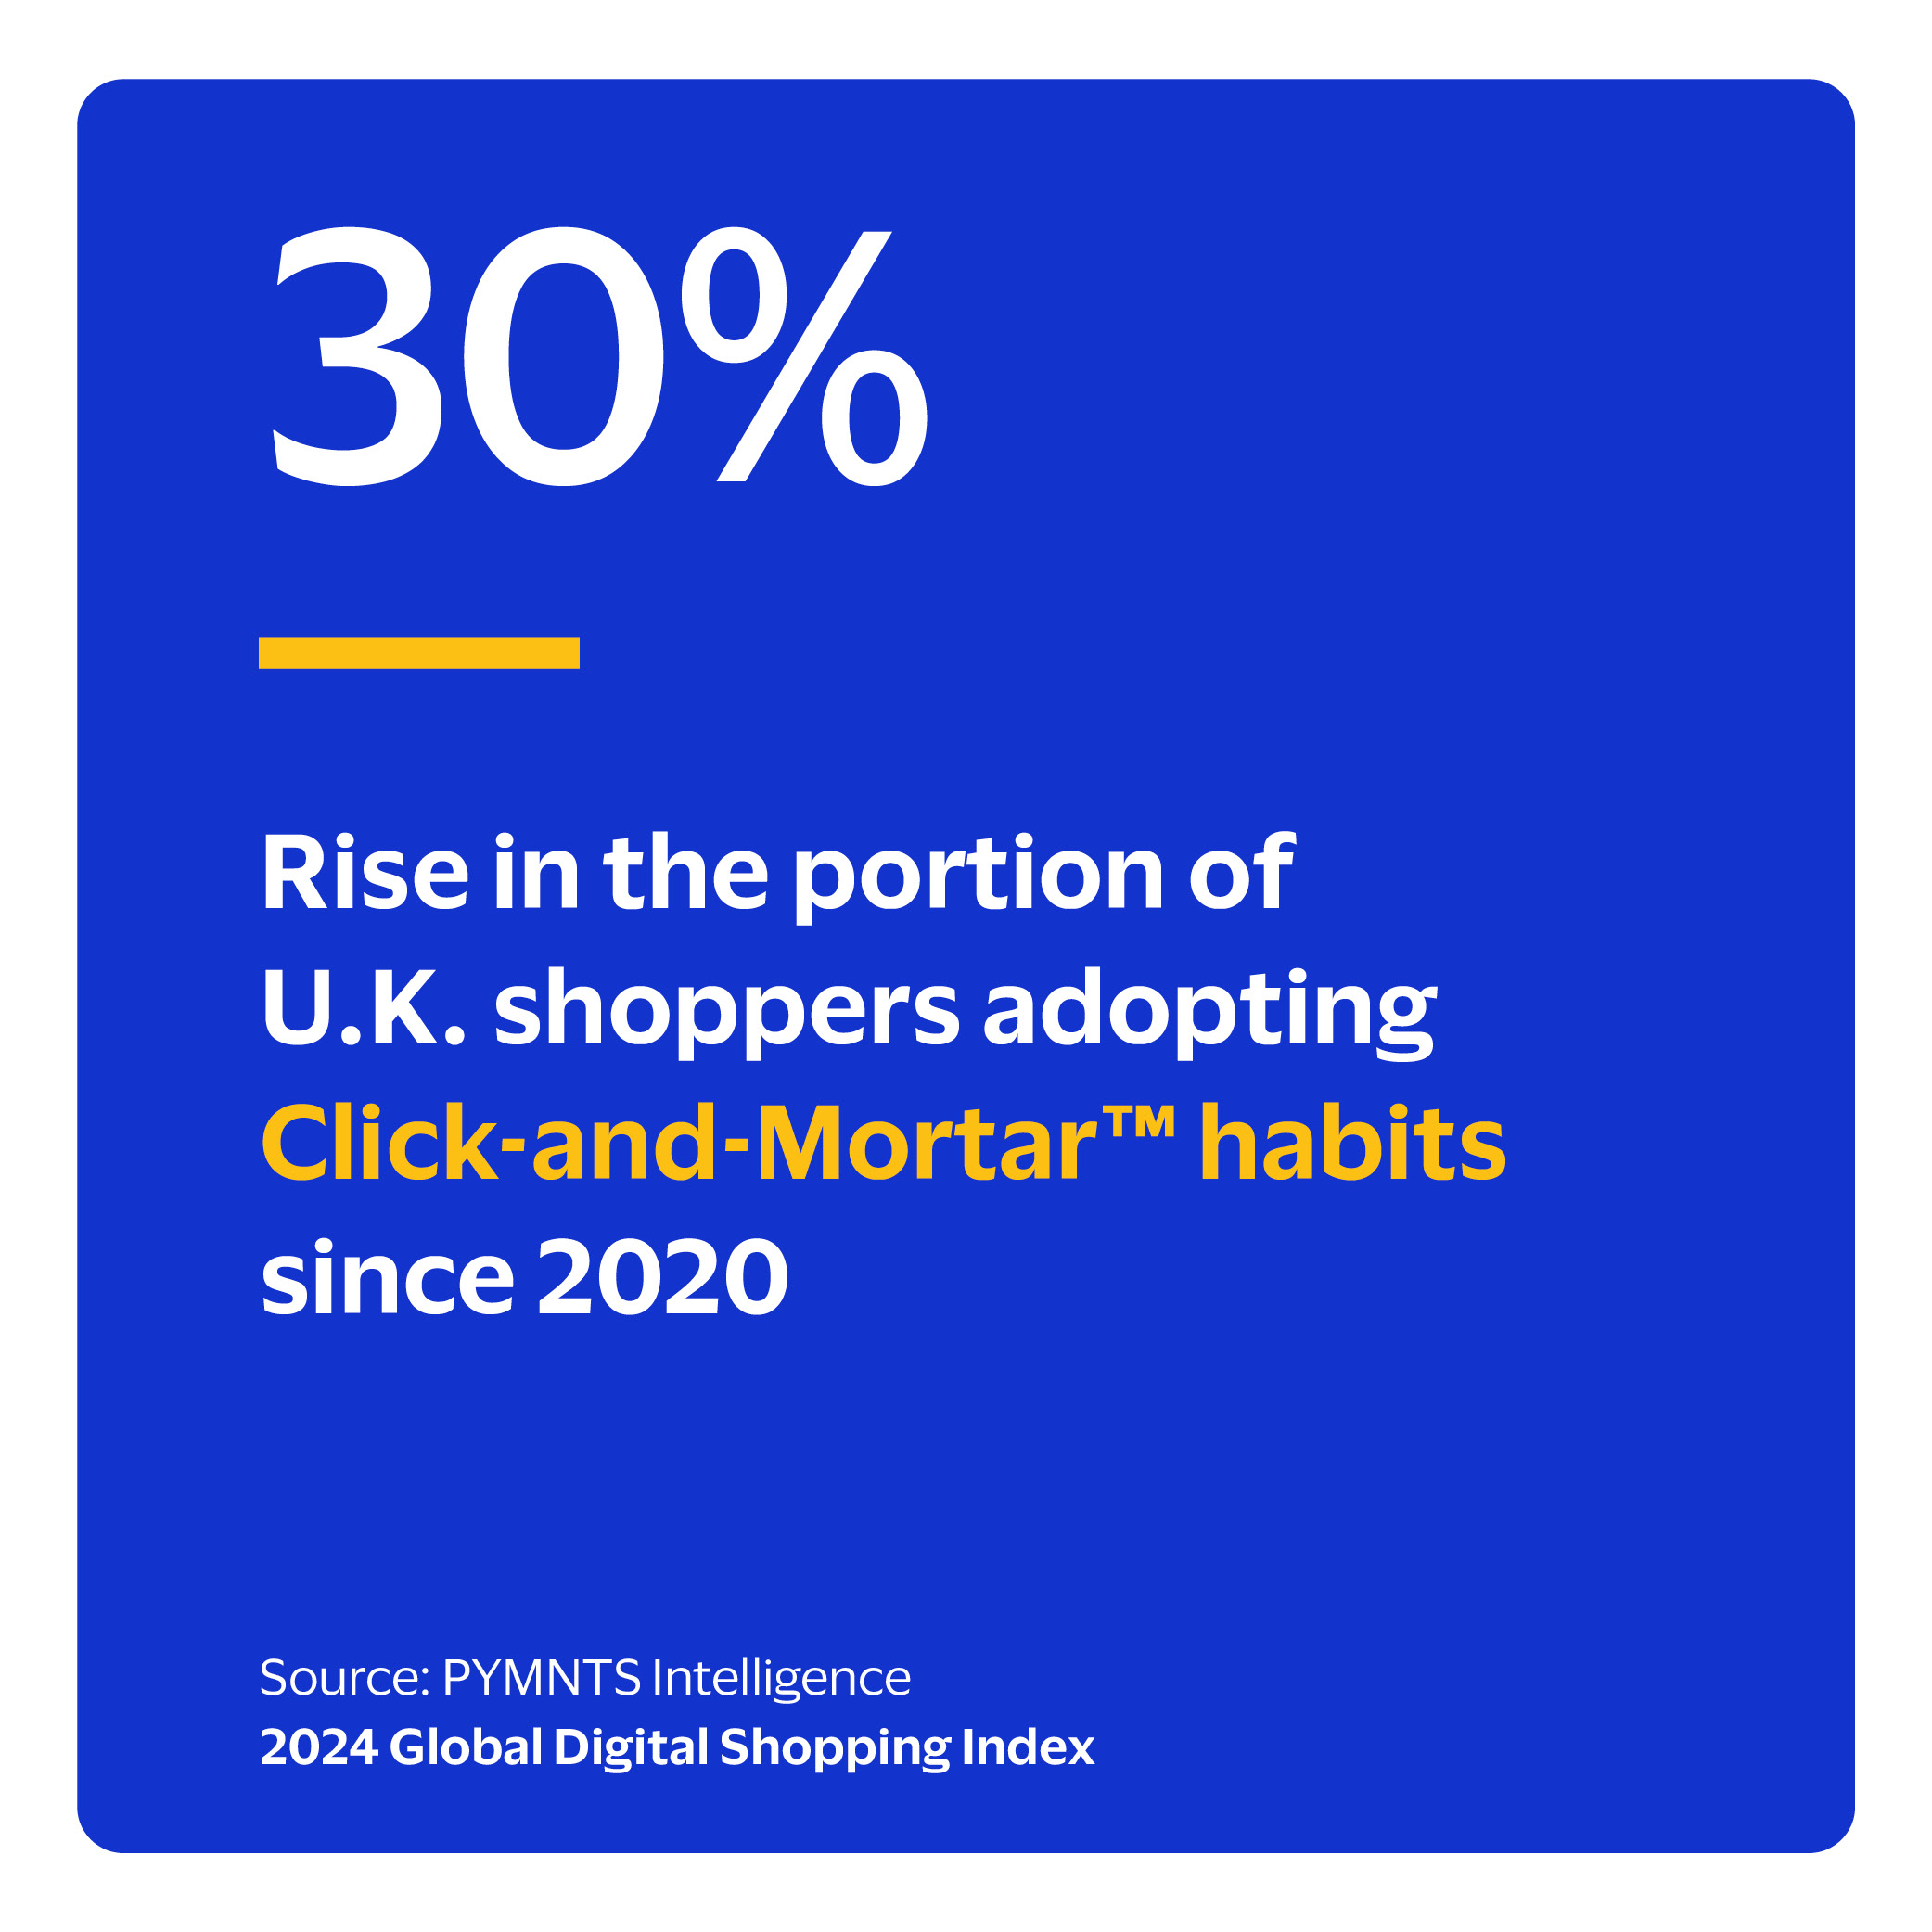 30%: Rise in the portion of U.K. shoppers adopting Click-and-Mortar™ habits since 2020